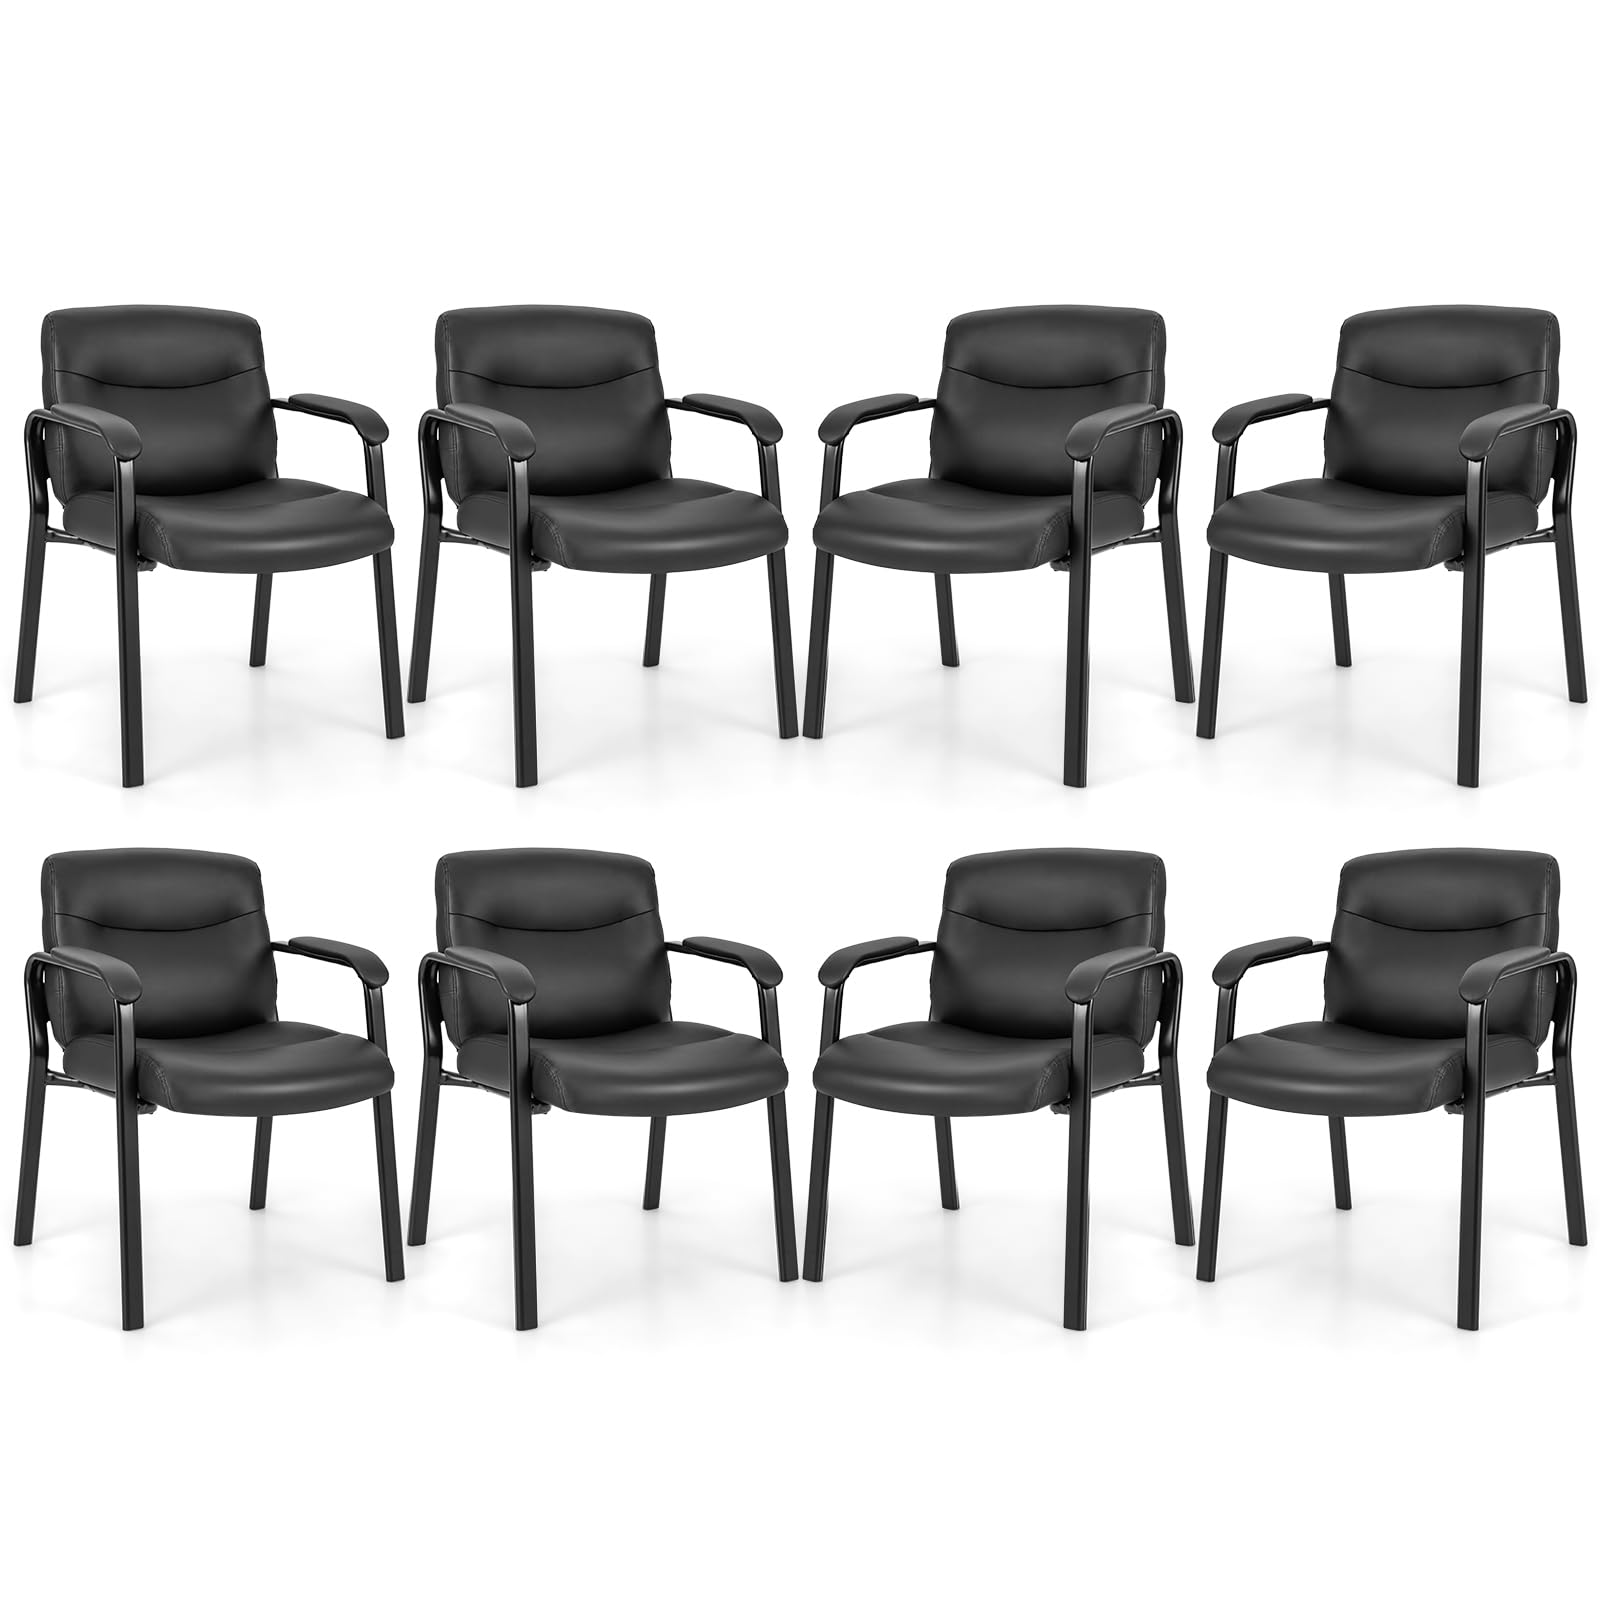 Giantex Waiting Room Chairs Set - Office Reception Chair Set